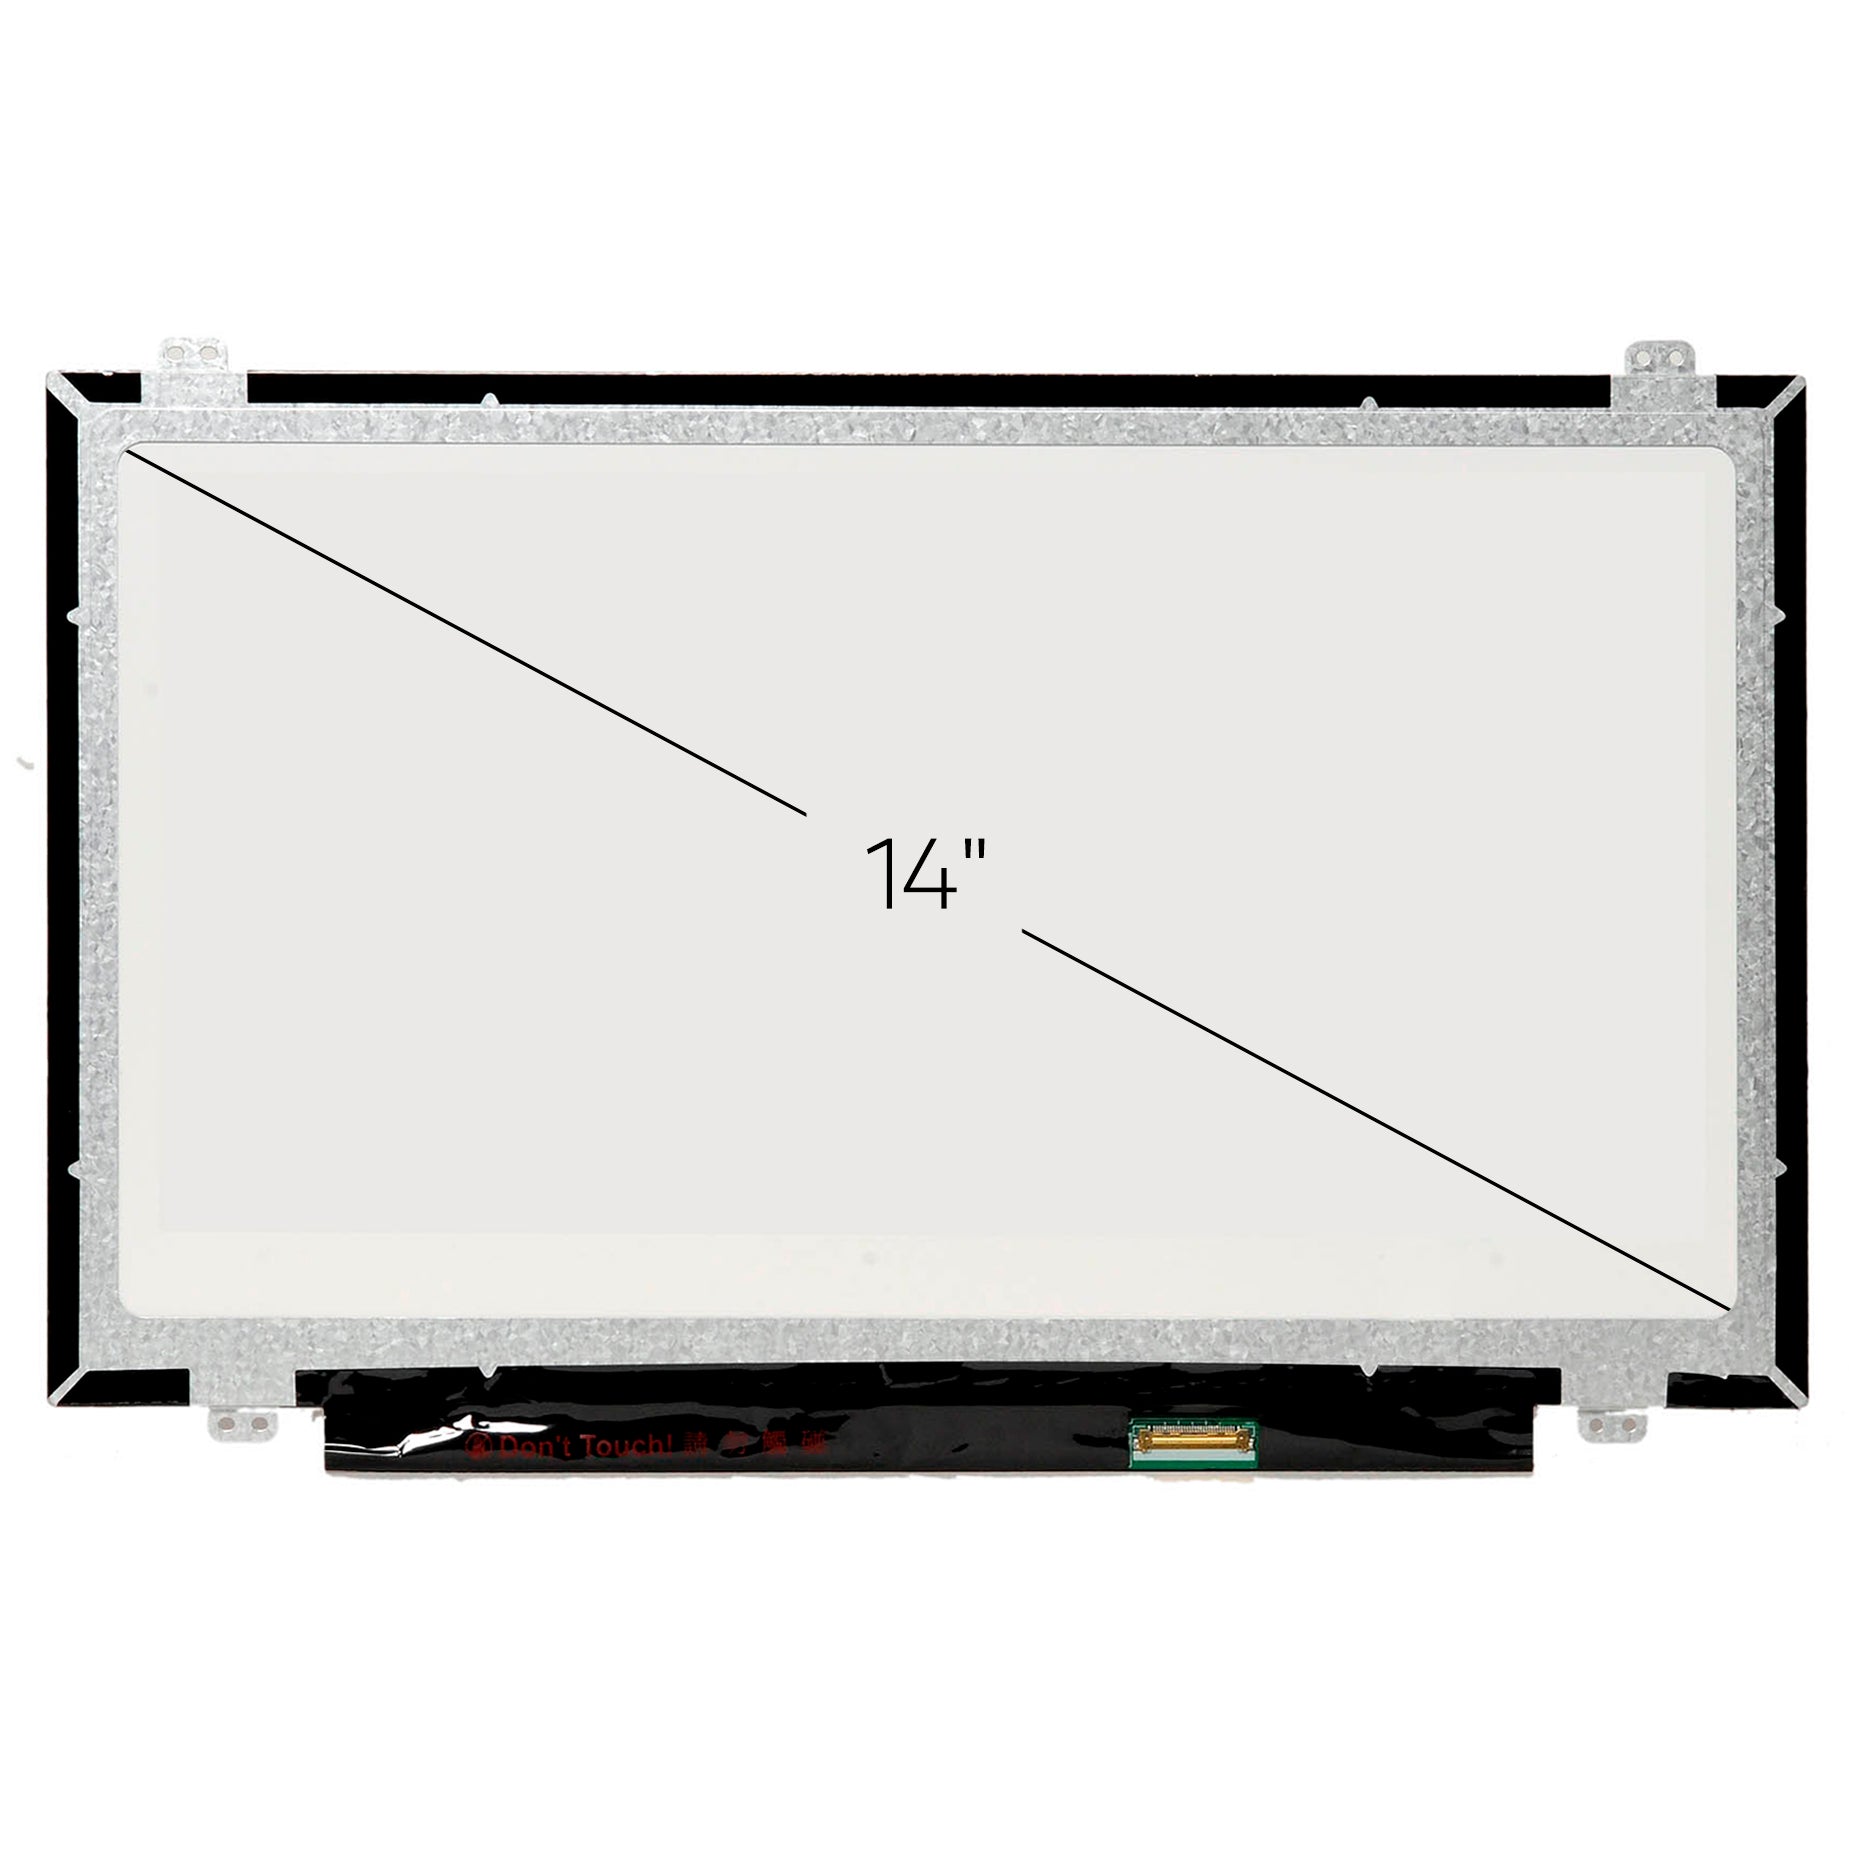 Screen Replacement for N140BGE-EB3 REV.C1 HD 1366x768 Glossy LCD LED Display